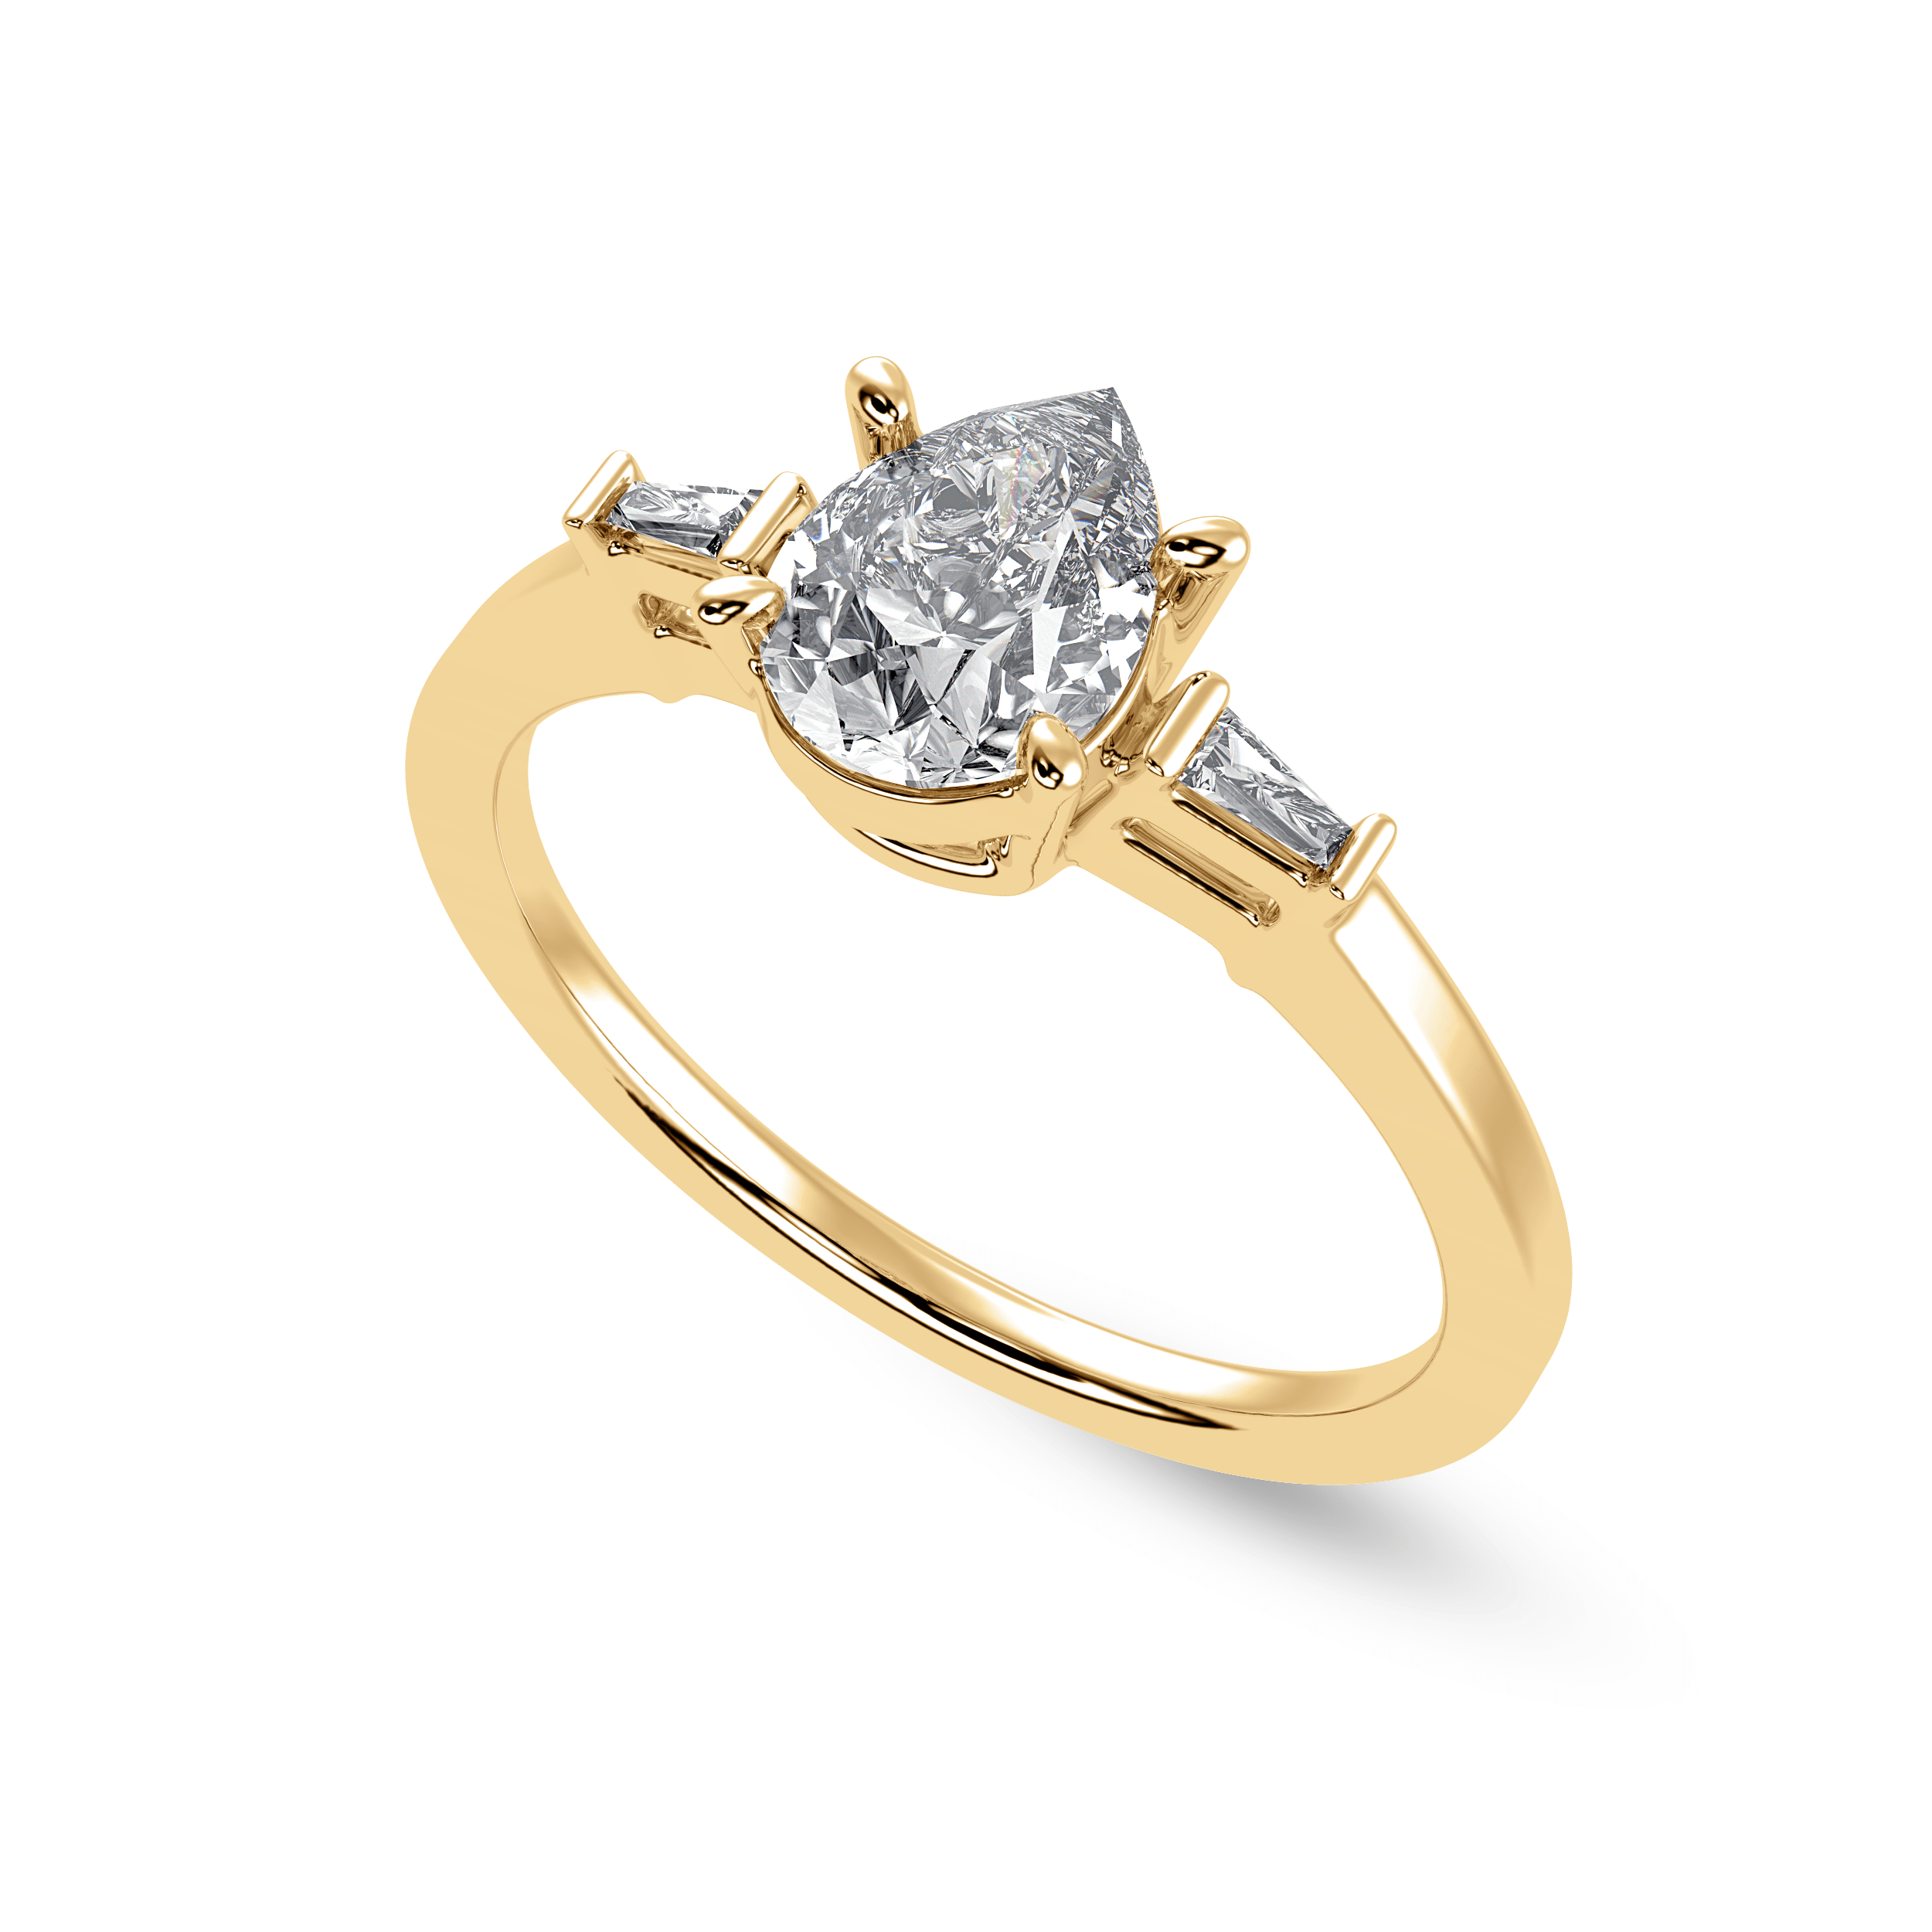 Pear-shaped diamond rings are trending—shop these engagement ring options -  Reviewed